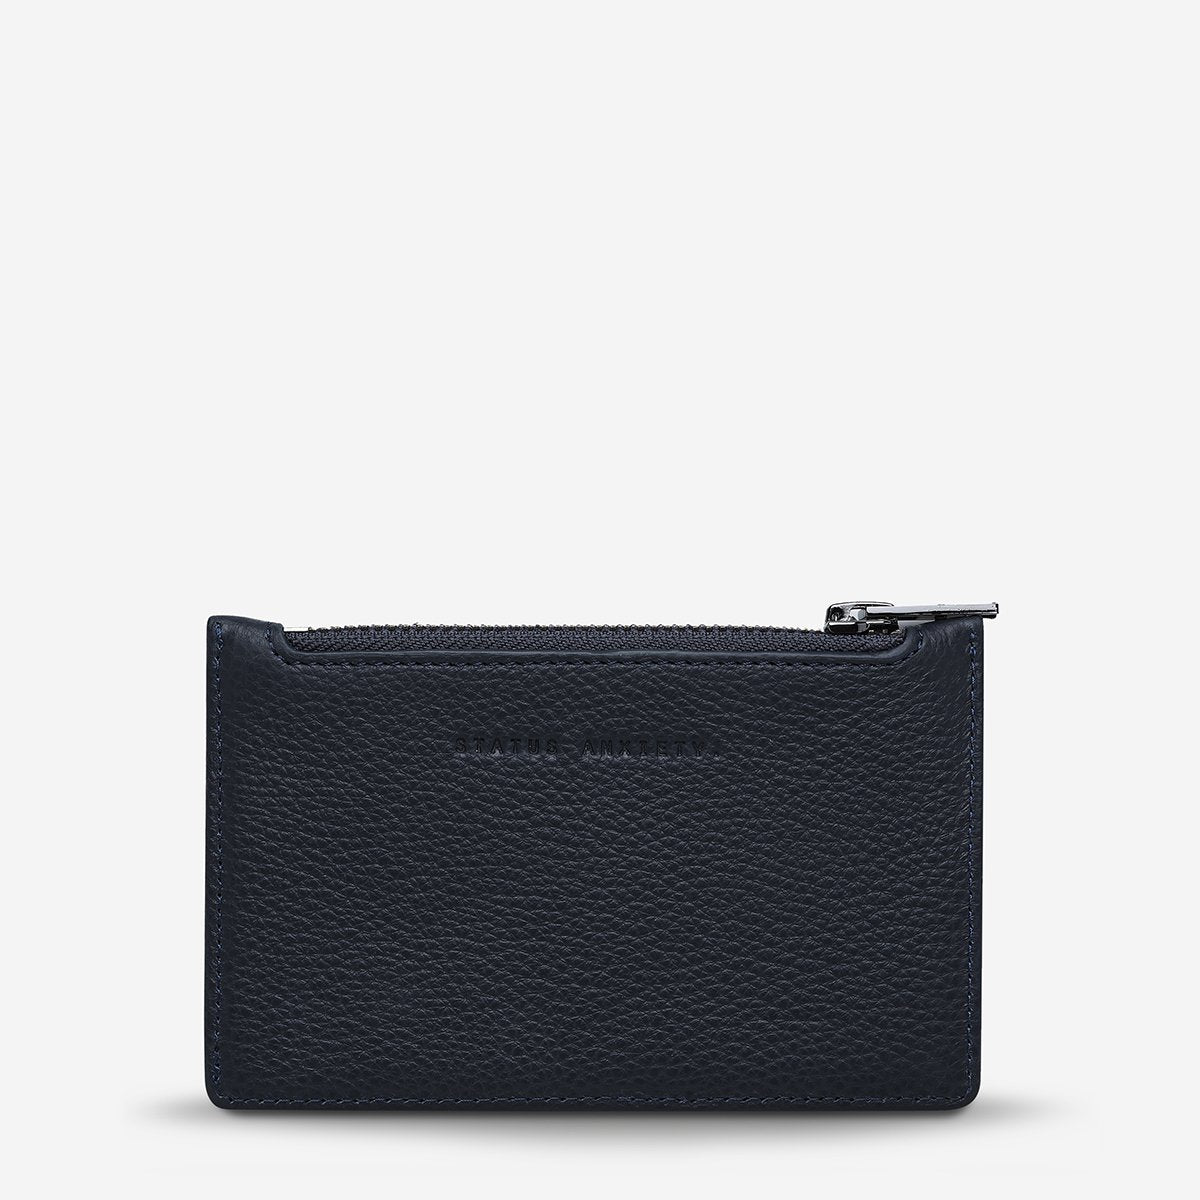 Avoiding Things Leather Wallet in Navy Blue